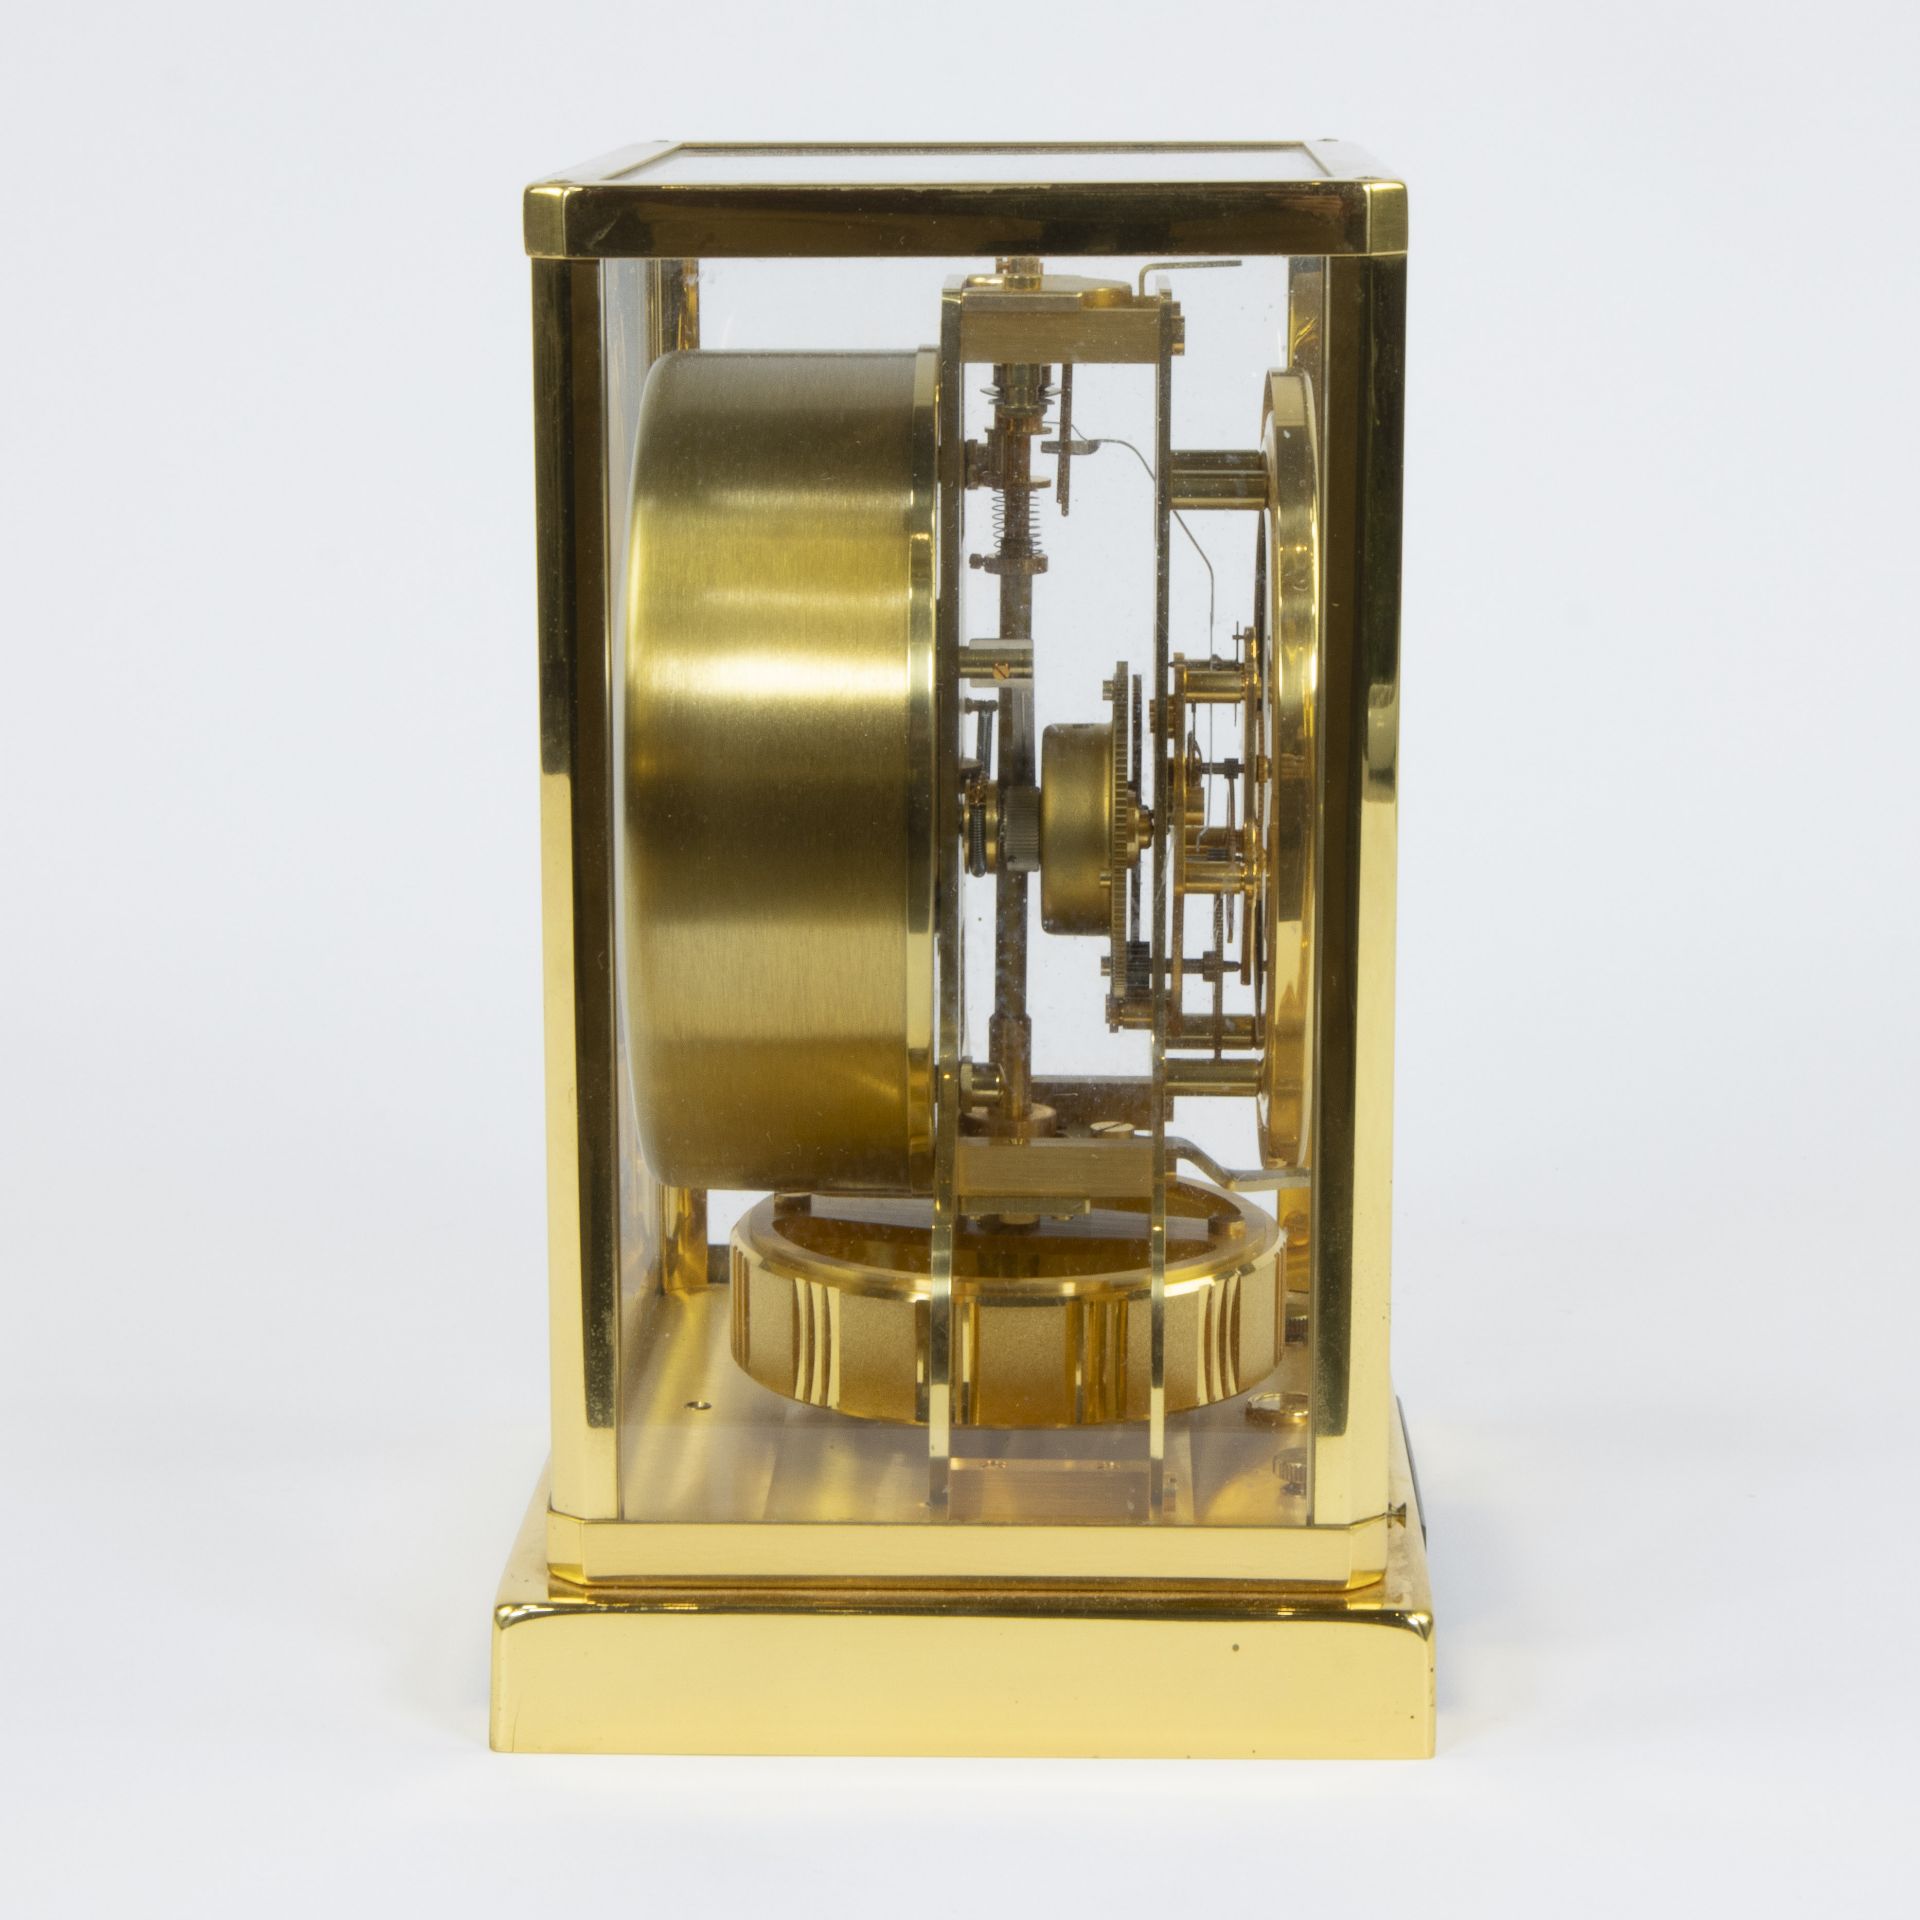 Jaeger-LeCoultre Atmos clock Swiss made - Image 4 of 4